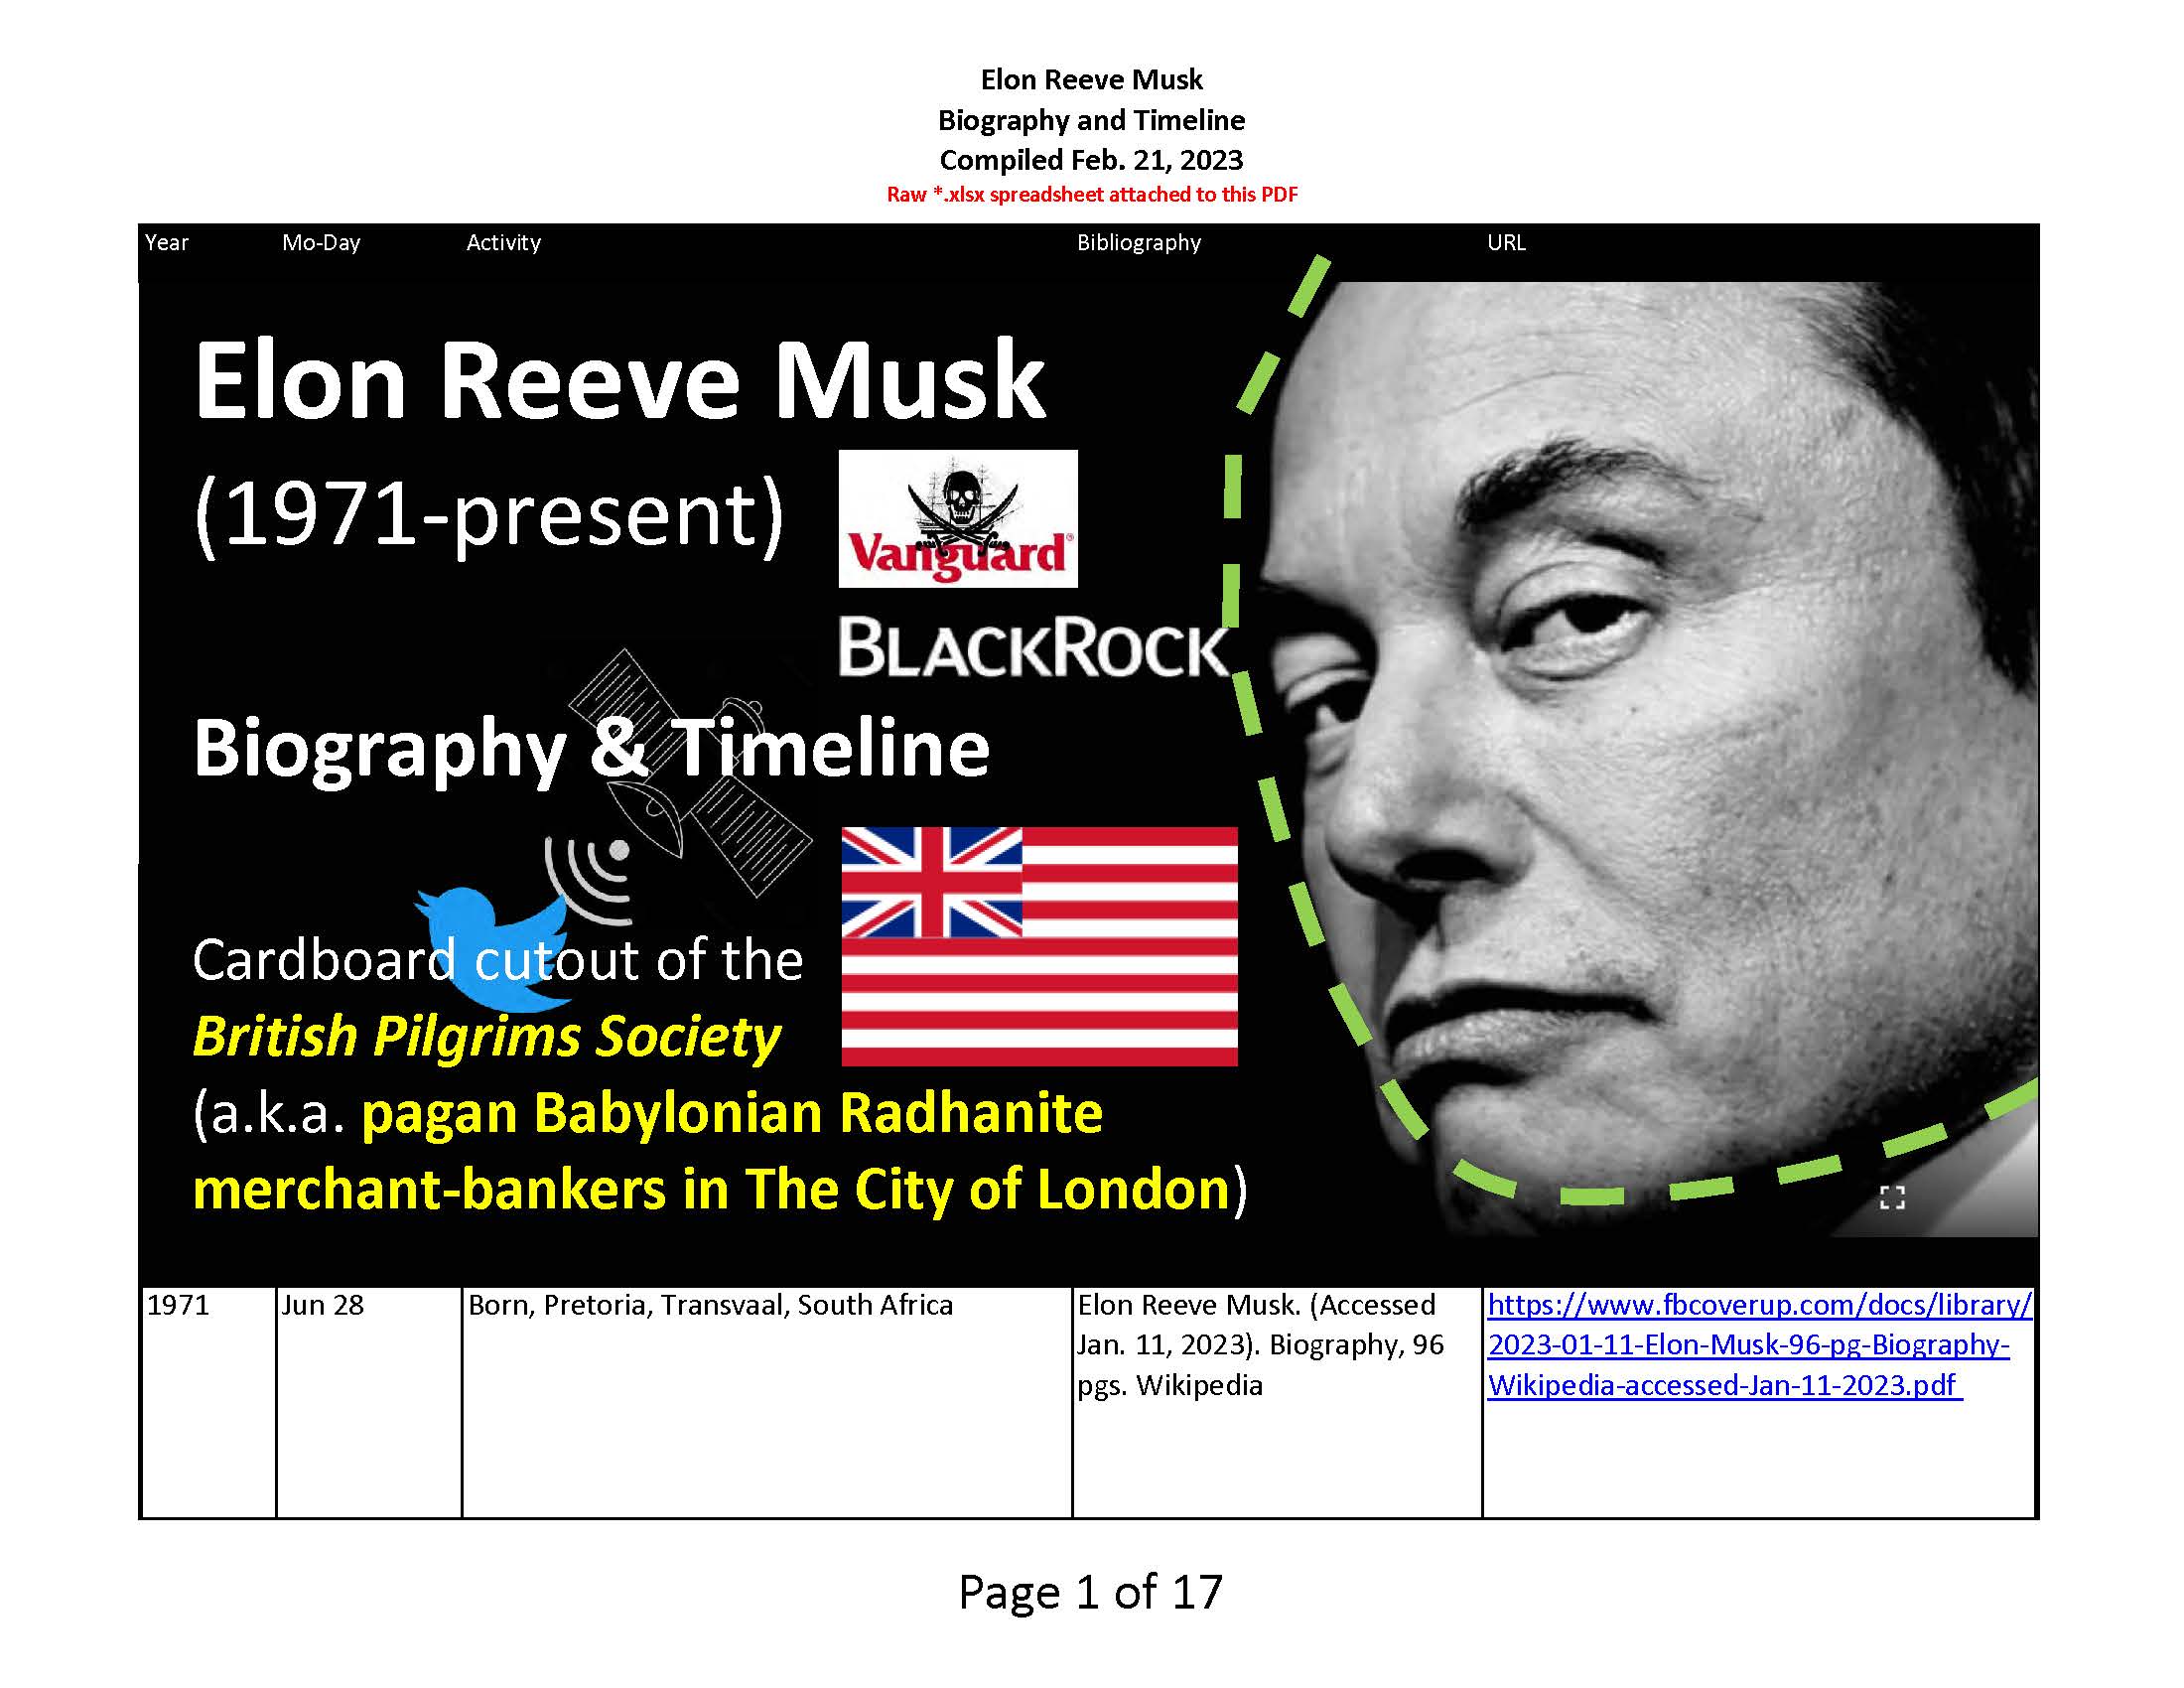 Elon Reeve Musk. (Compiled Feb. 21, 2023). Biography and Timeline. Anonymous Patriots.